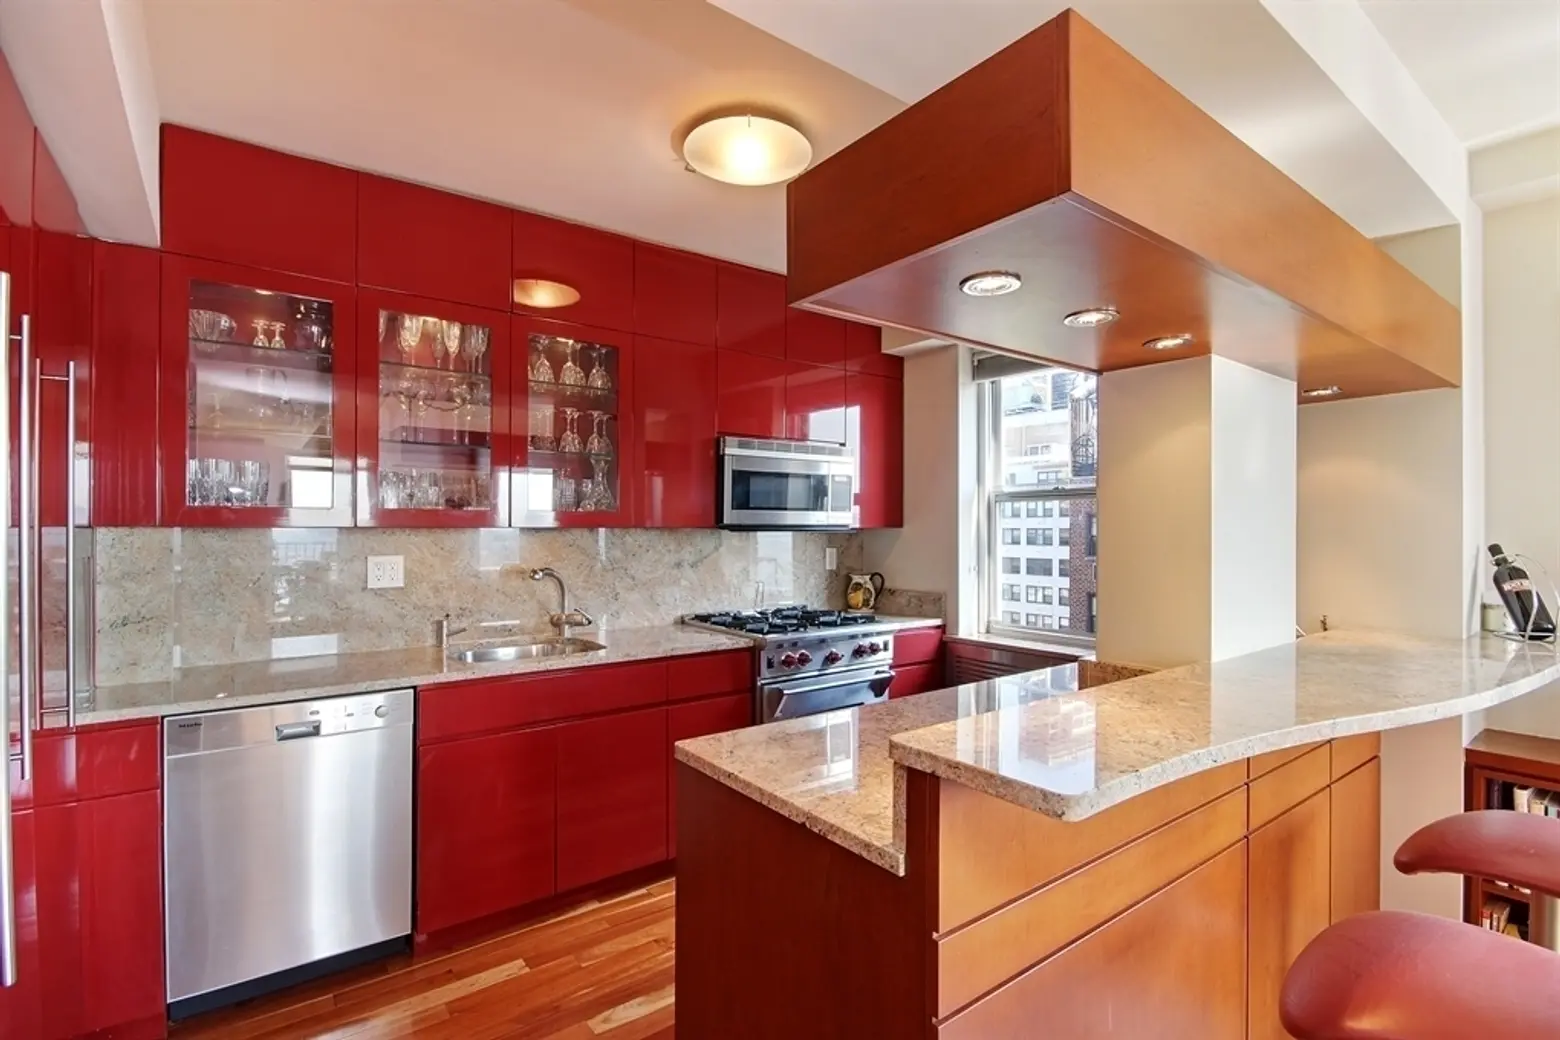 12 beekman place, 25 beekman place, high low, great listings, east river views, nyc apartment, kitchen, terrace